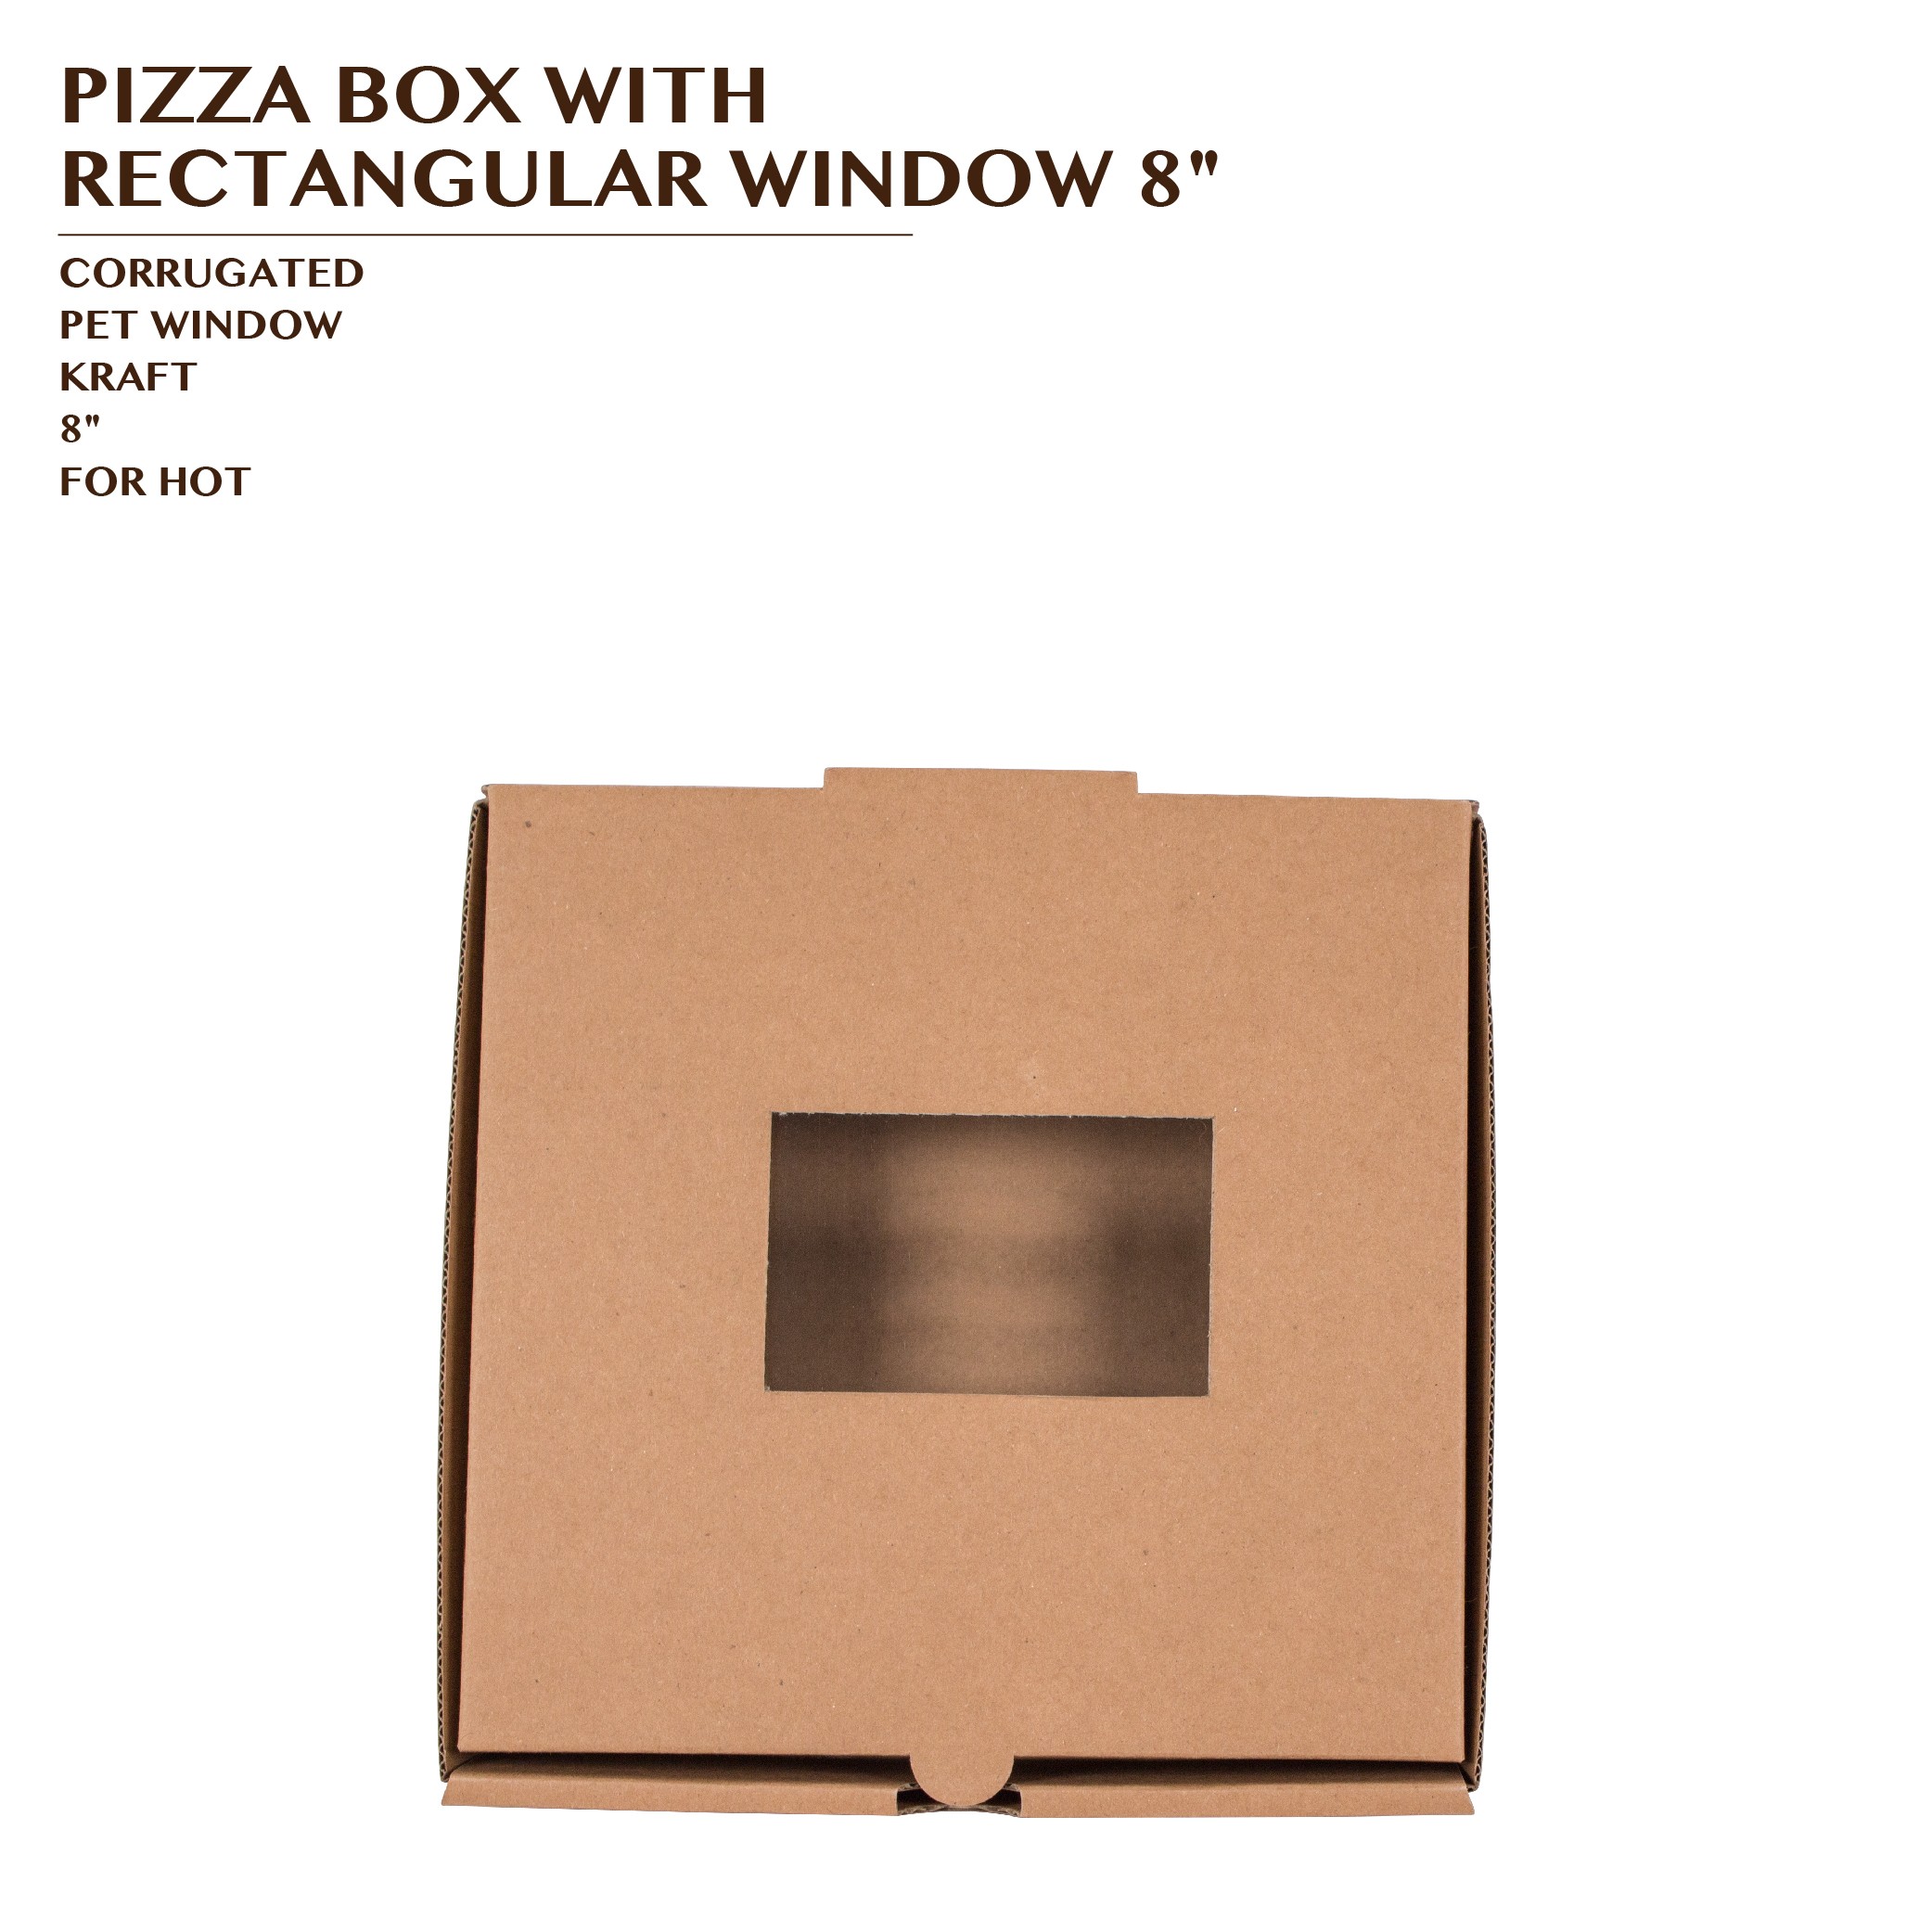 PRE-ORDER PIZZA BOX WITH RECTANGULAR WINDOW 8"